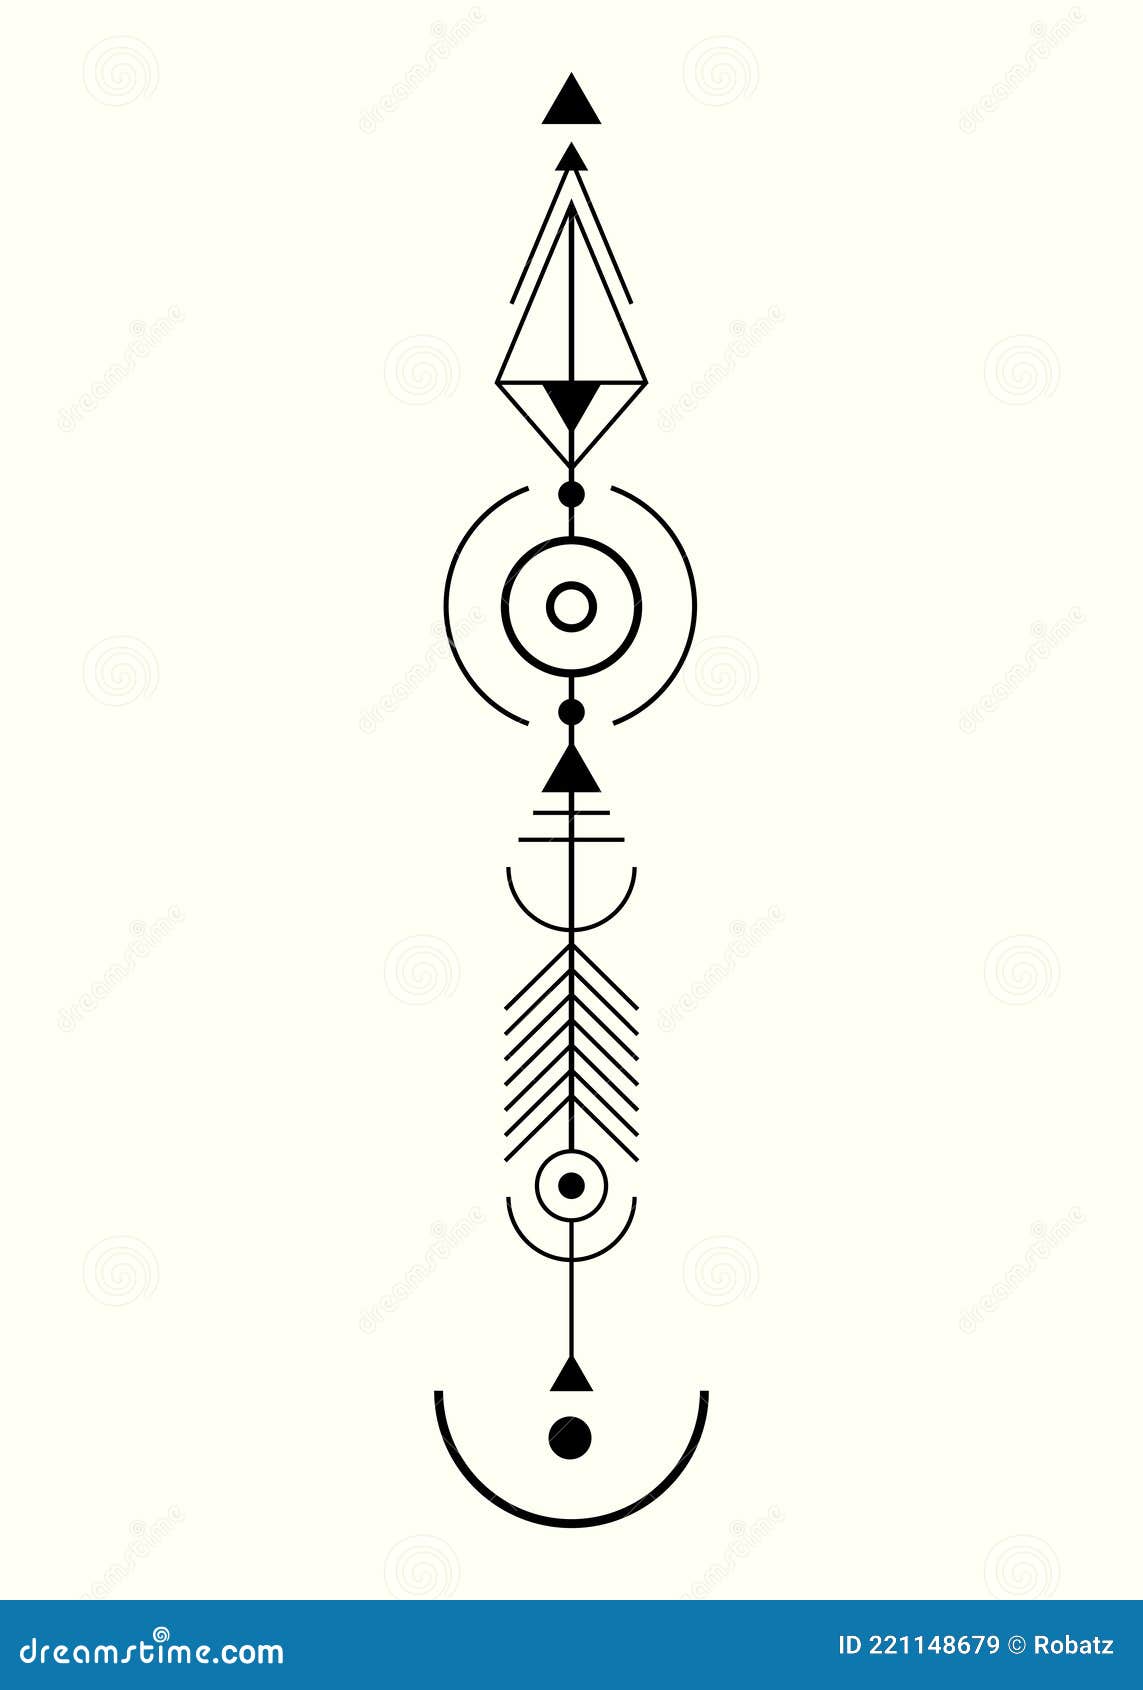 Alchemy Symbols/Signs And Their Meanings, Elemental Symbols - The Extensive  List